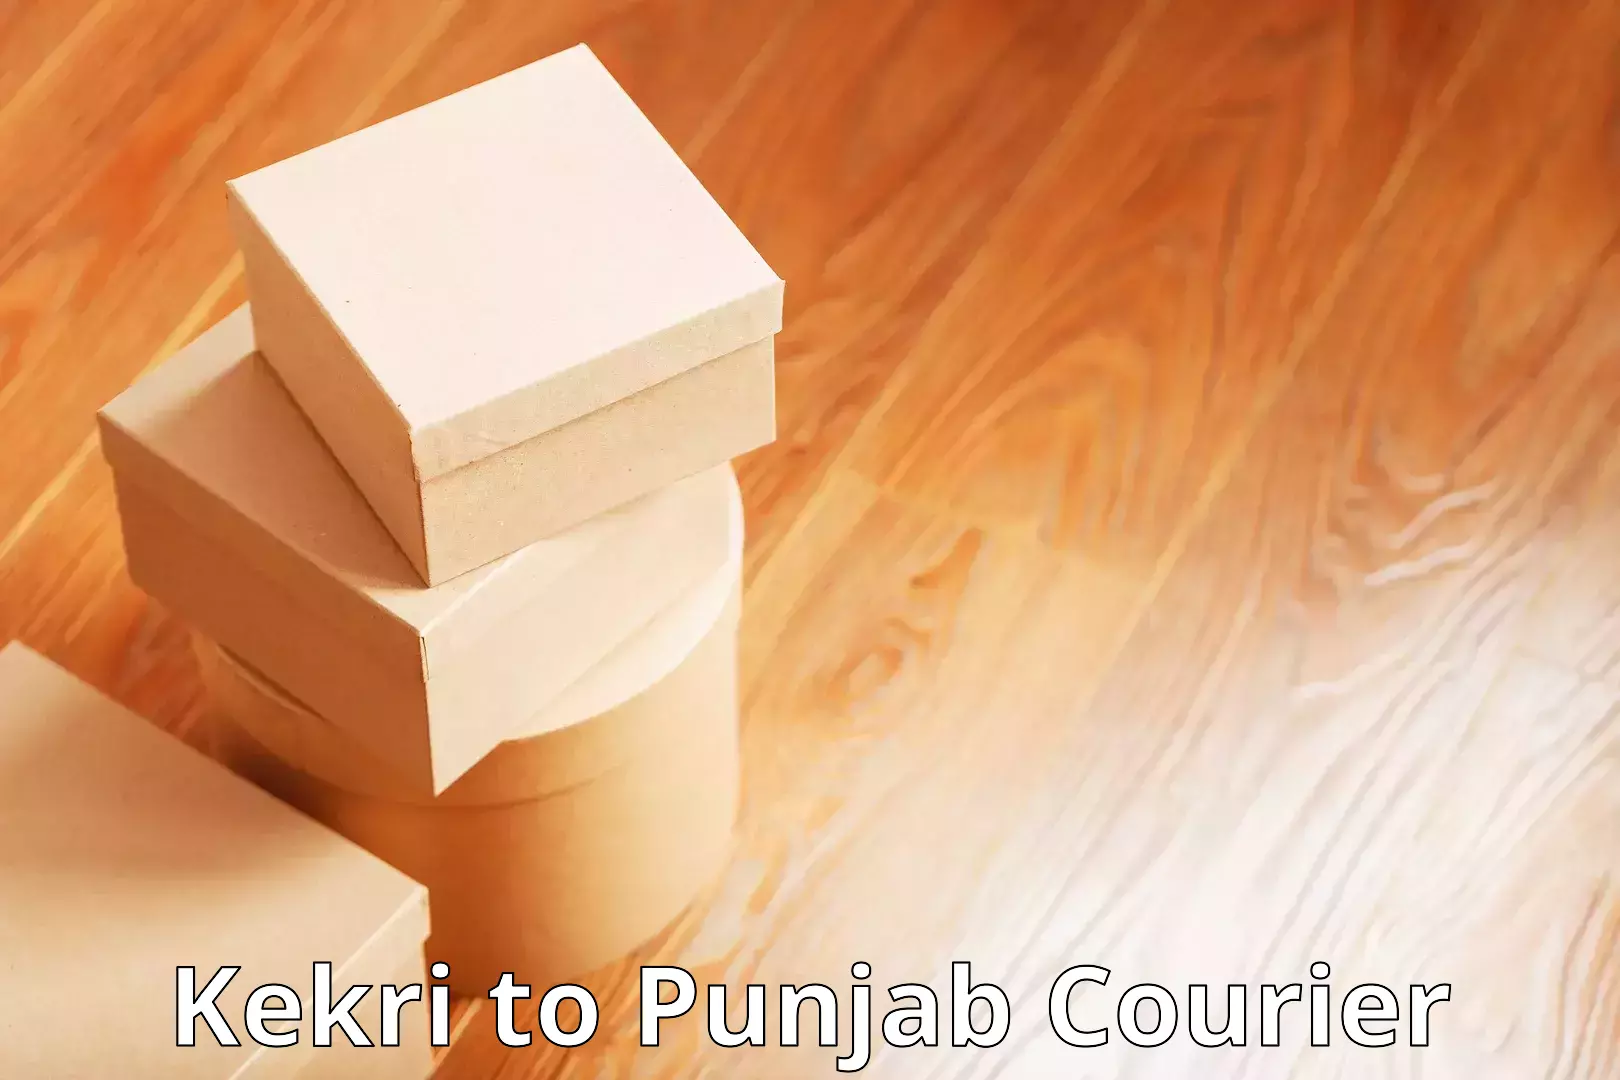 Global courier networks Kekri to Amritsar